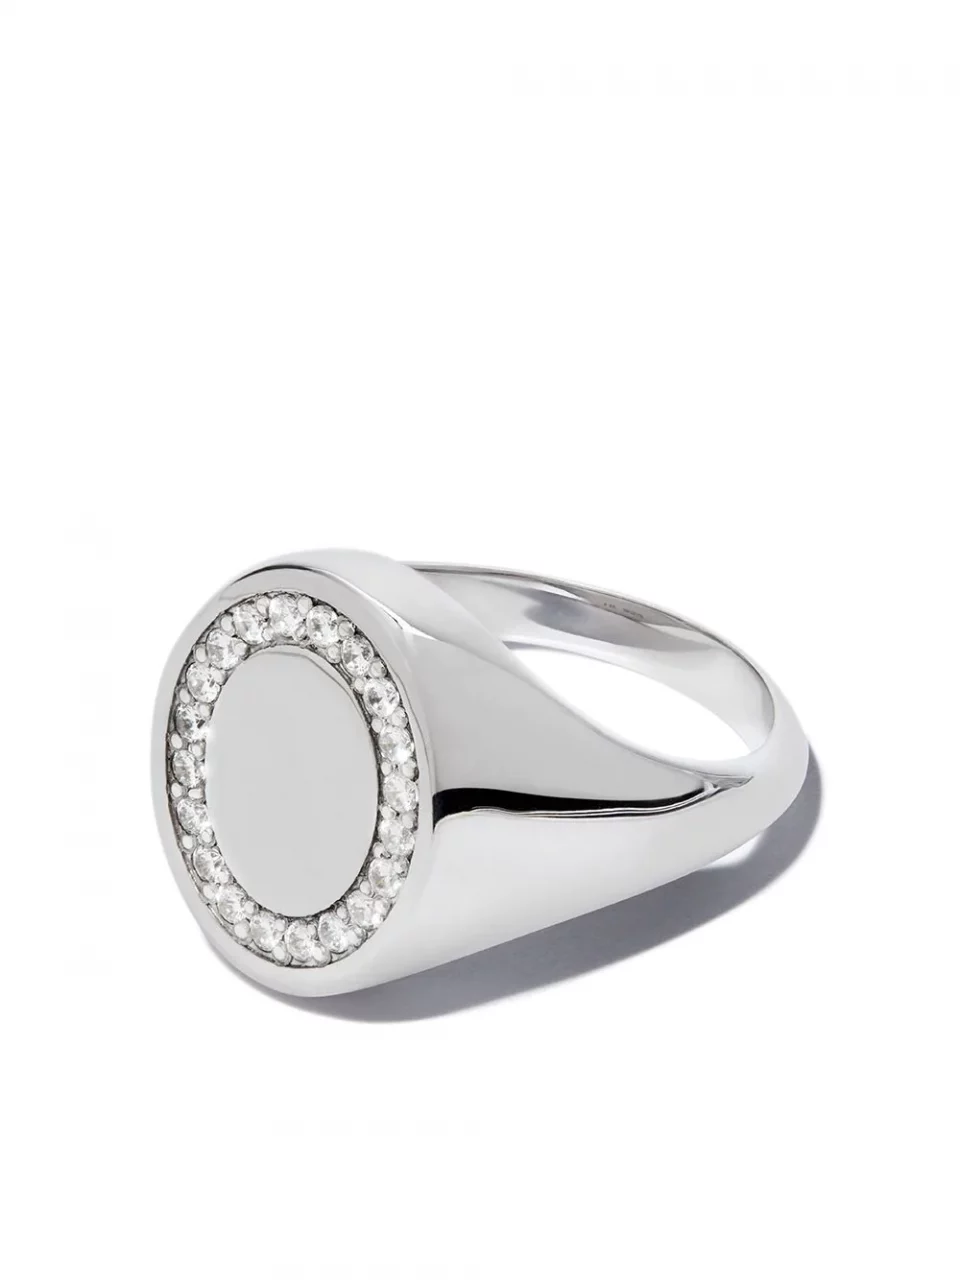 jewellery_reflections_com_Hatton_labs_ring